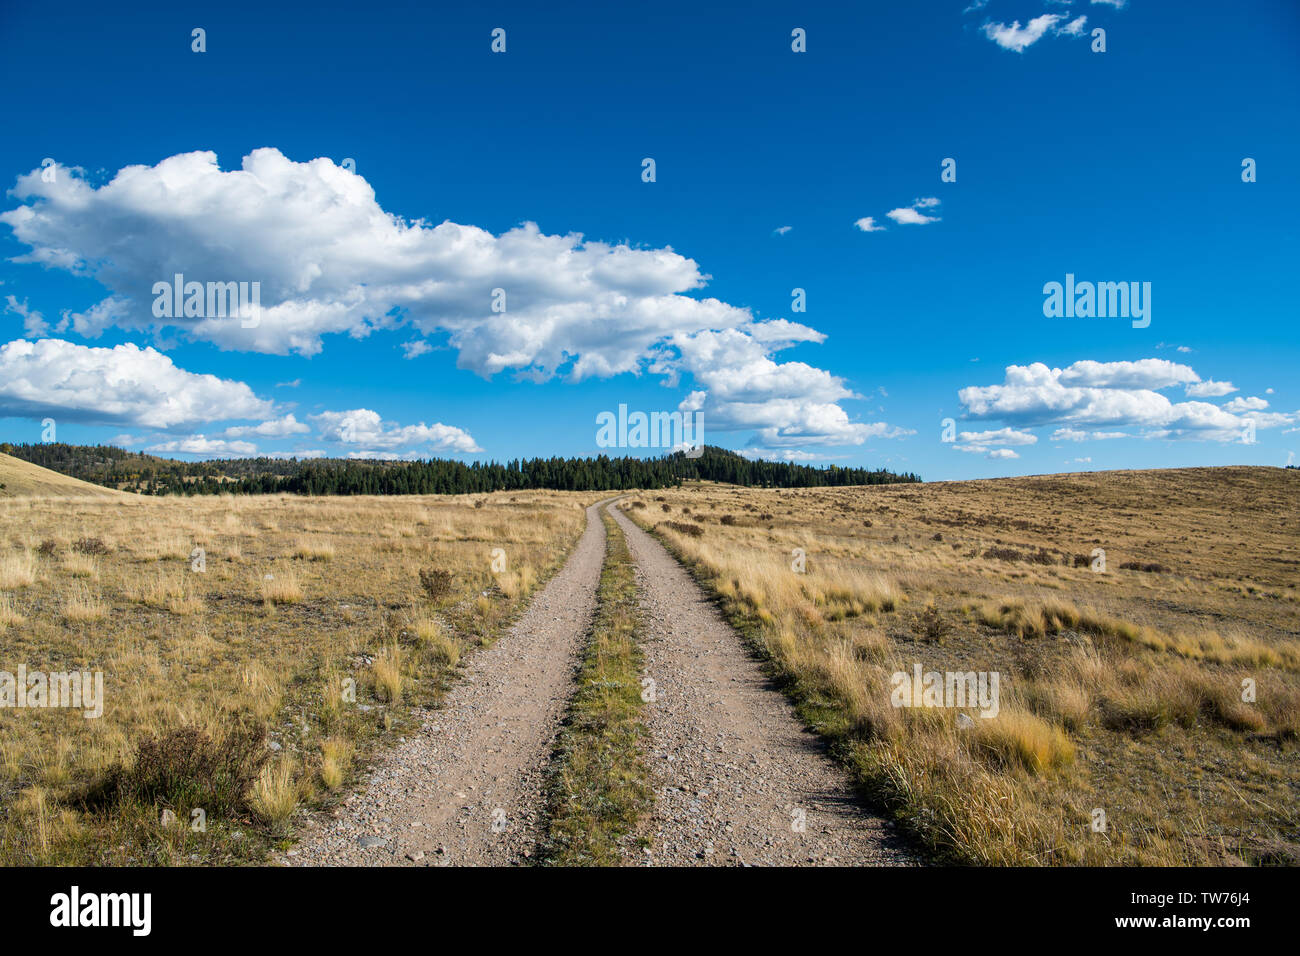 A gravel road curves through grassy fields and ranch land under a beautiful blue sky with white puffy clouds Stock Photo